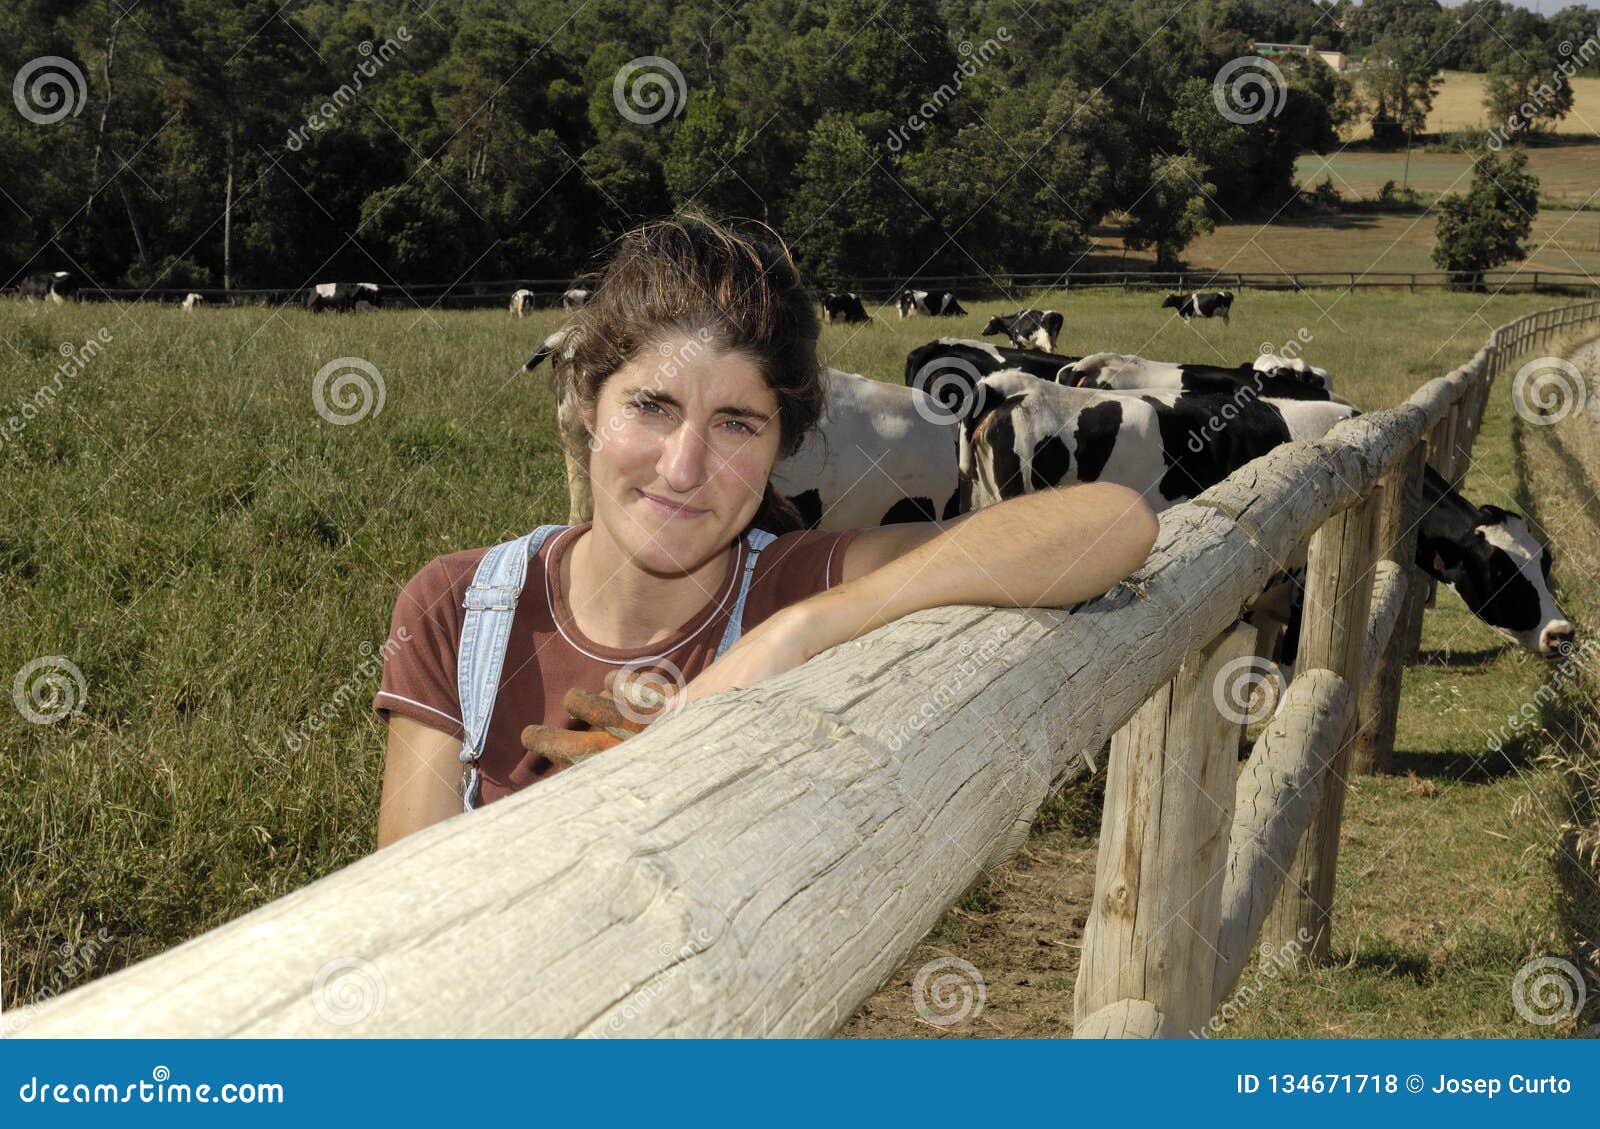 portrait of a farmer with her cows in the field